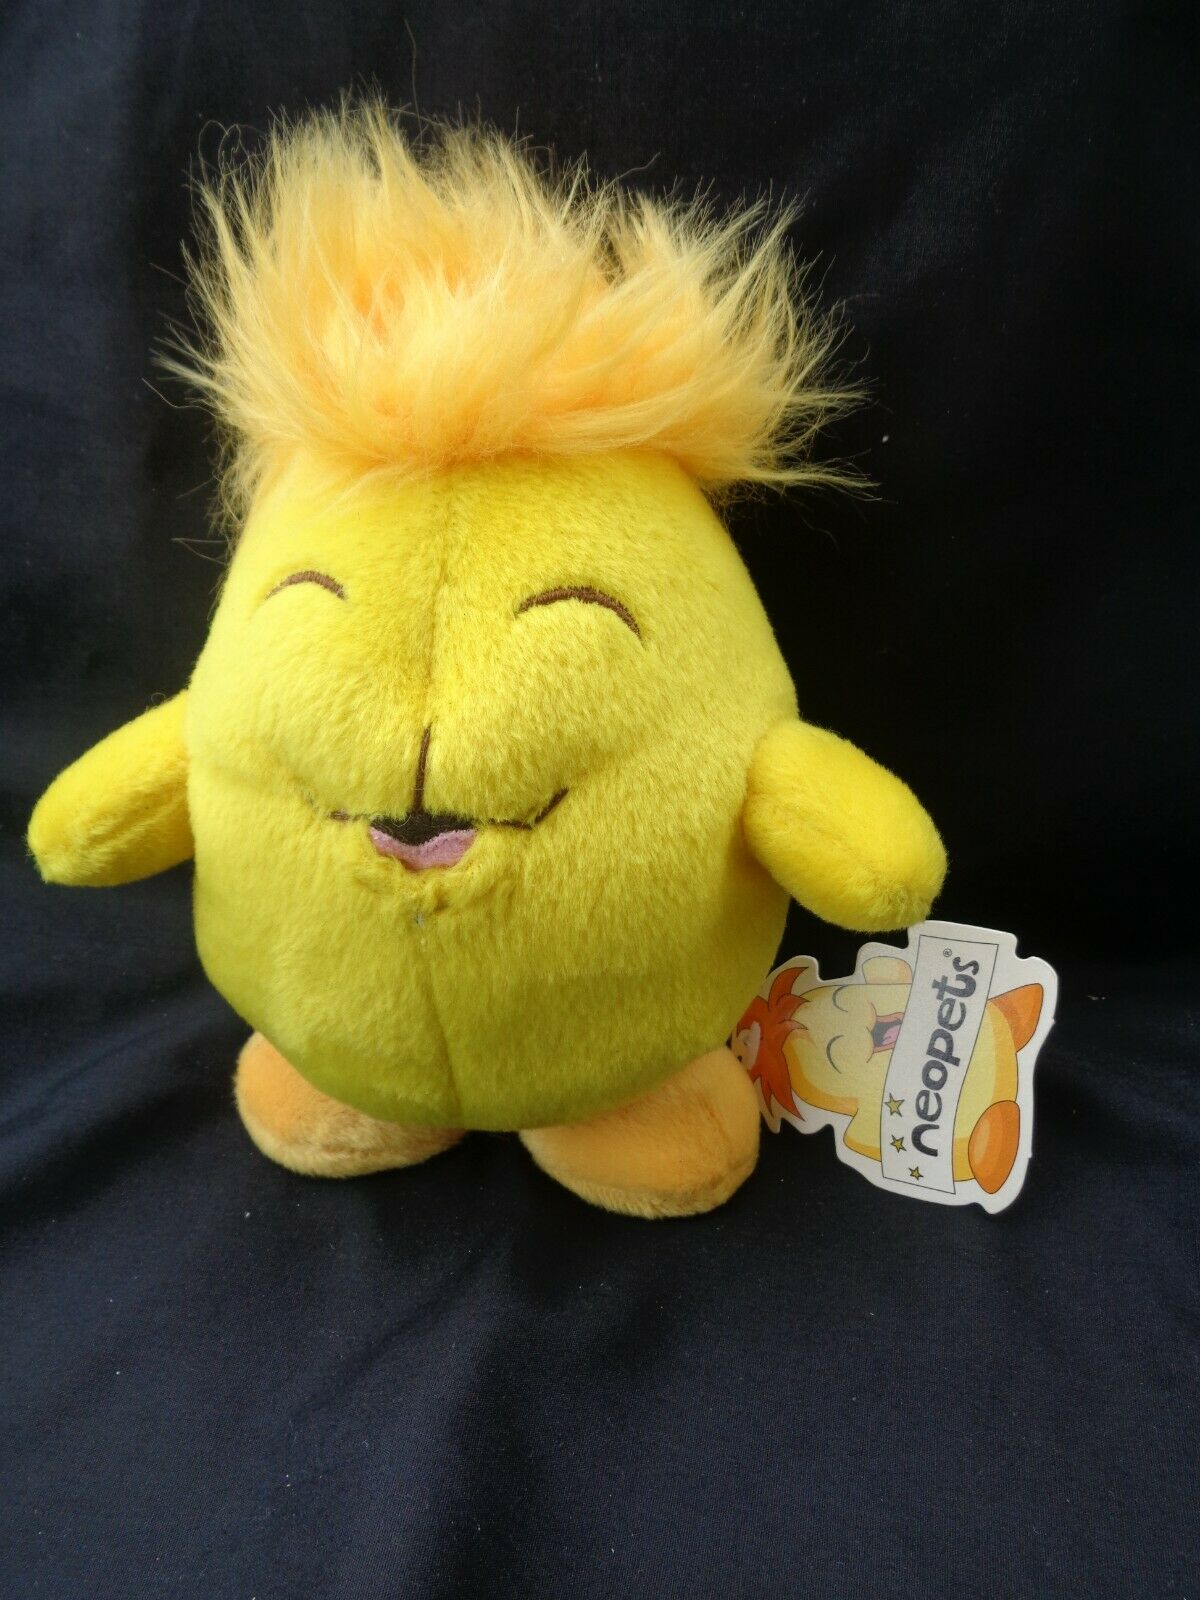 Chia Neopets Yellow Plush Egg Plushie 2002 - New With Tags